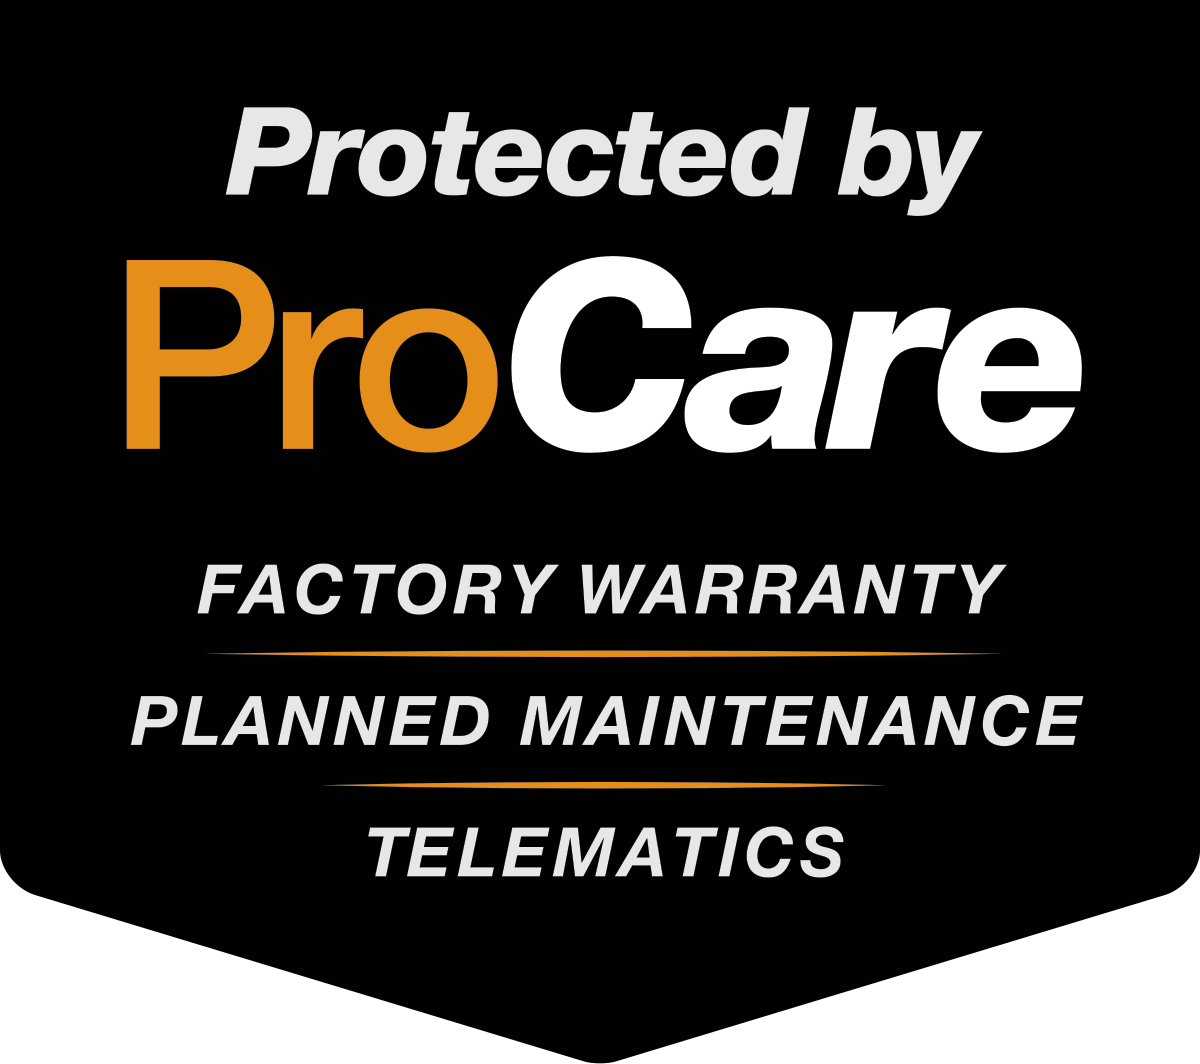 Protected by ProCare